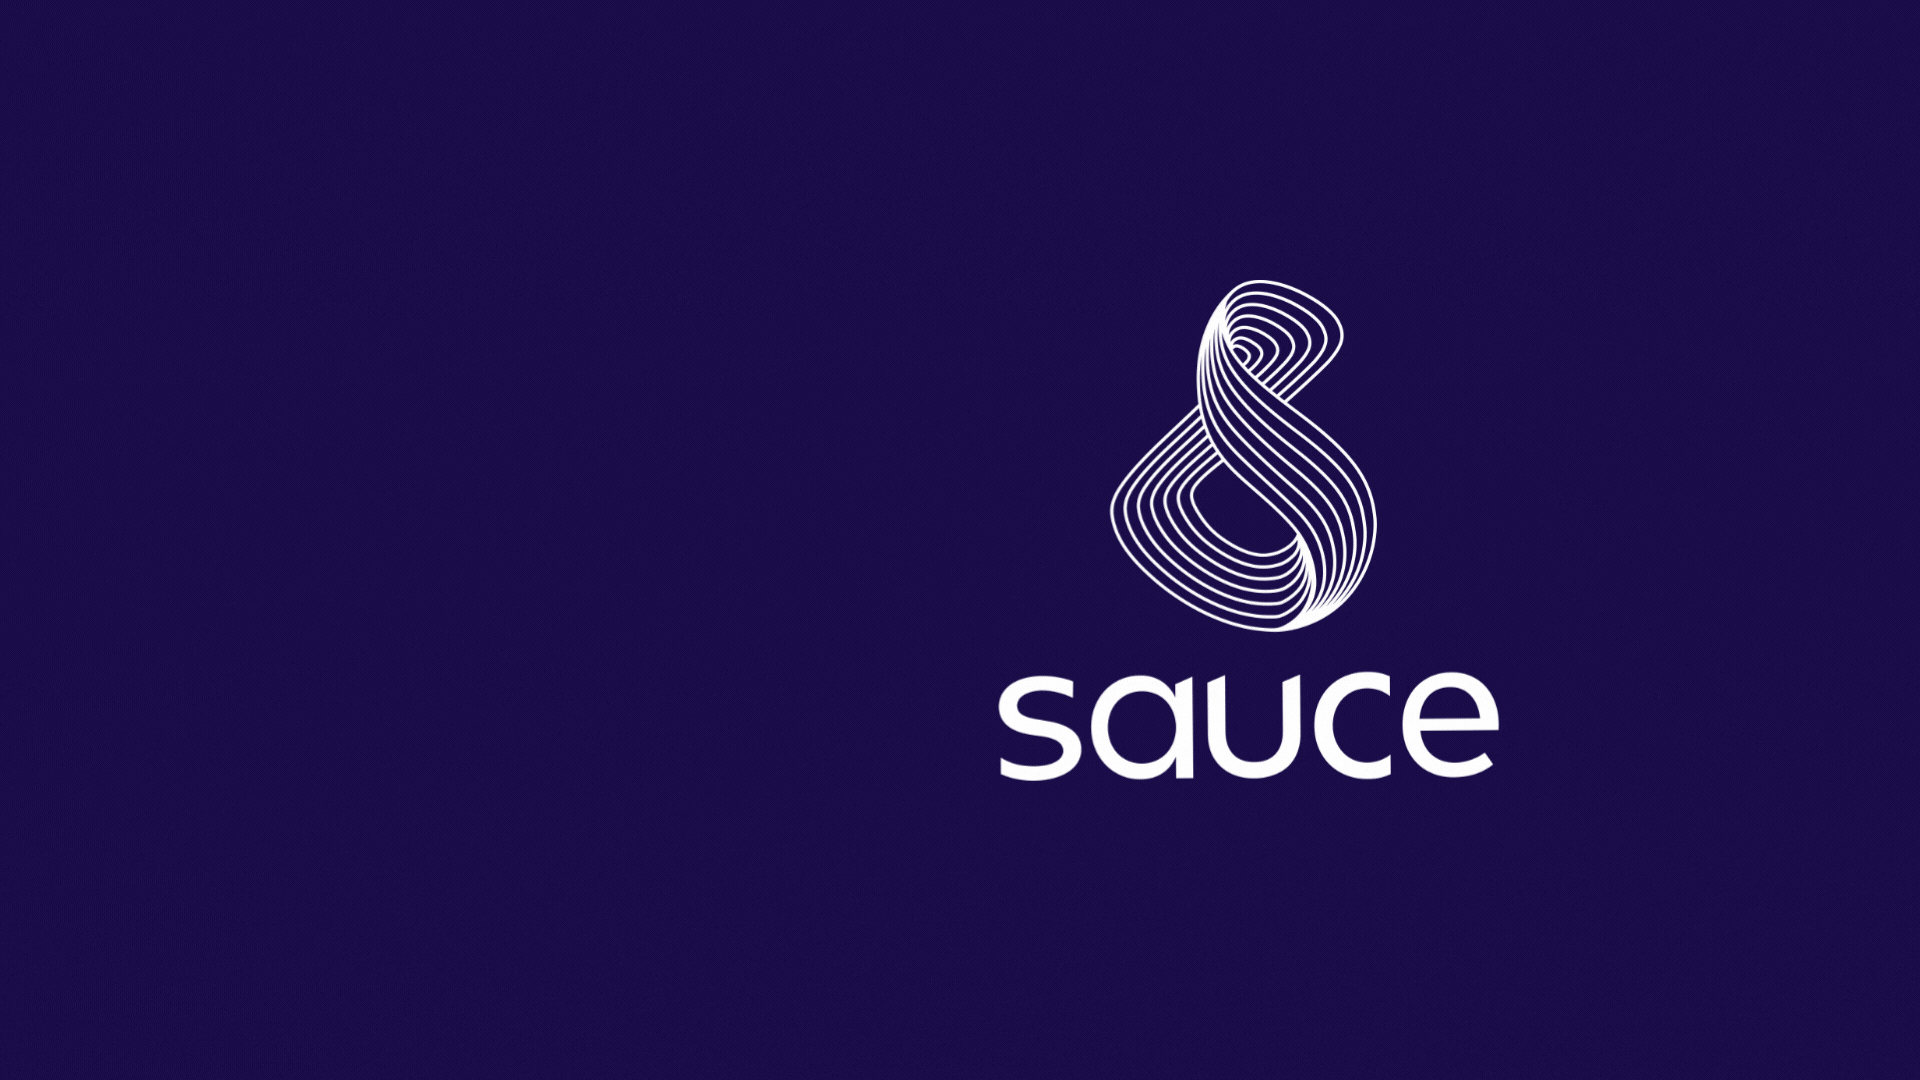 StoryBrand + Sauce = a Better Way to Build a Website that Works